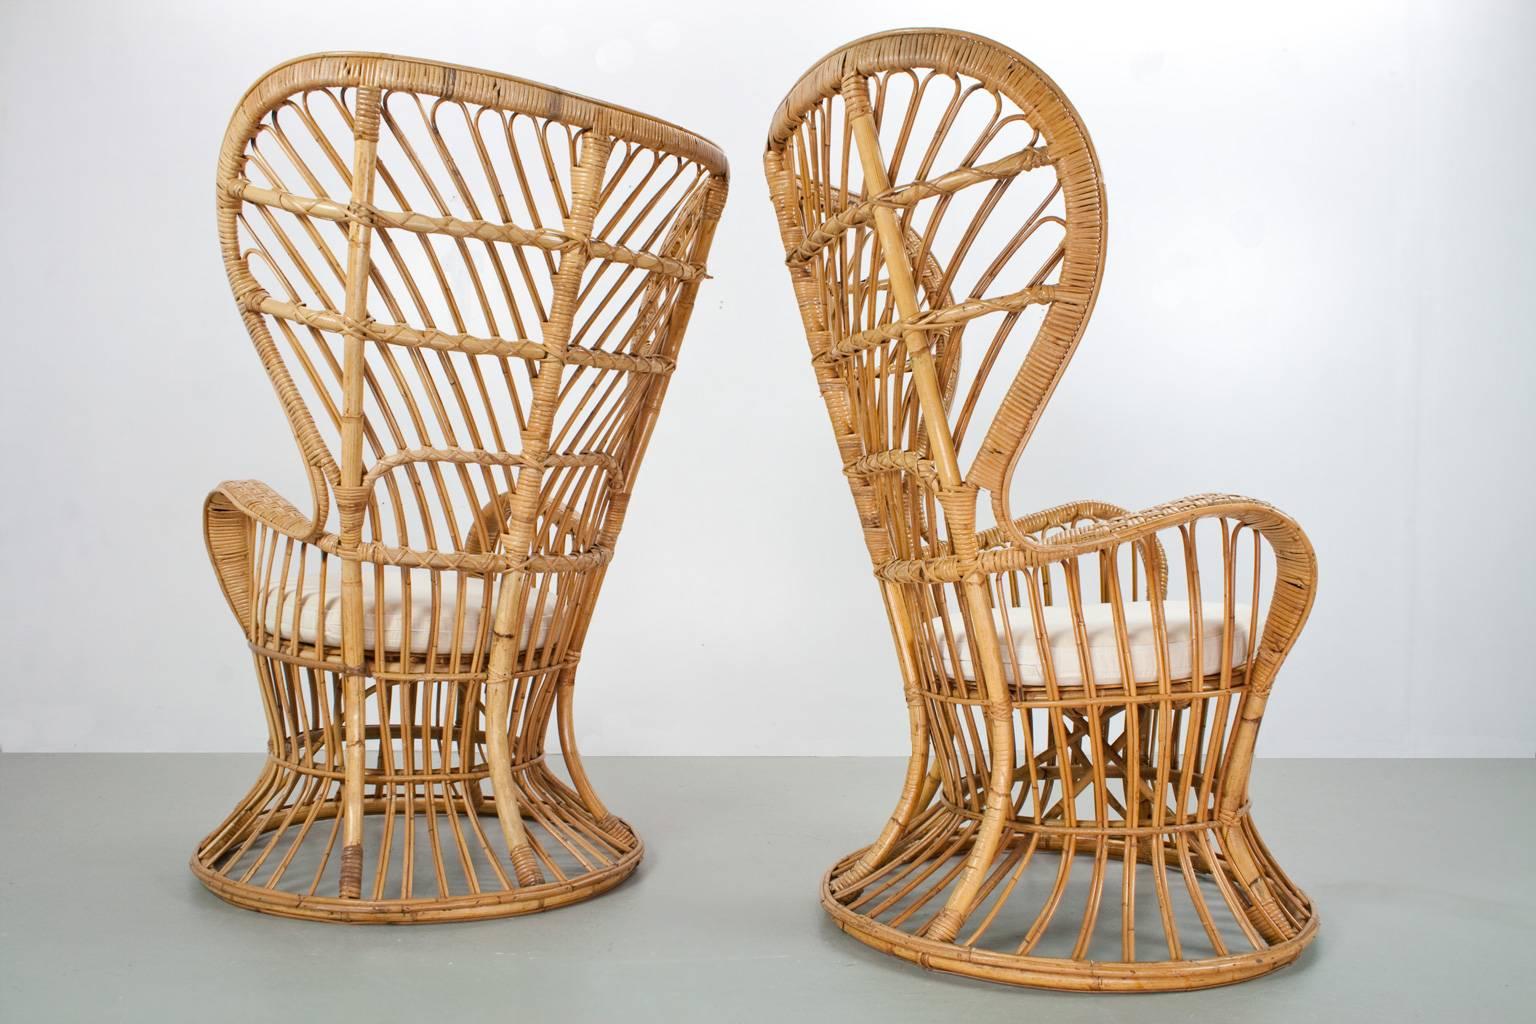 Italian elegant and hand crafted midcentury rattan high back armchairs designed by Lio Carminati in the 1950s and manufactured by Pierantonio Bonacina (Italy). The items were specifically designed for the prestigious cruise ship 'Conte Biancamano.'